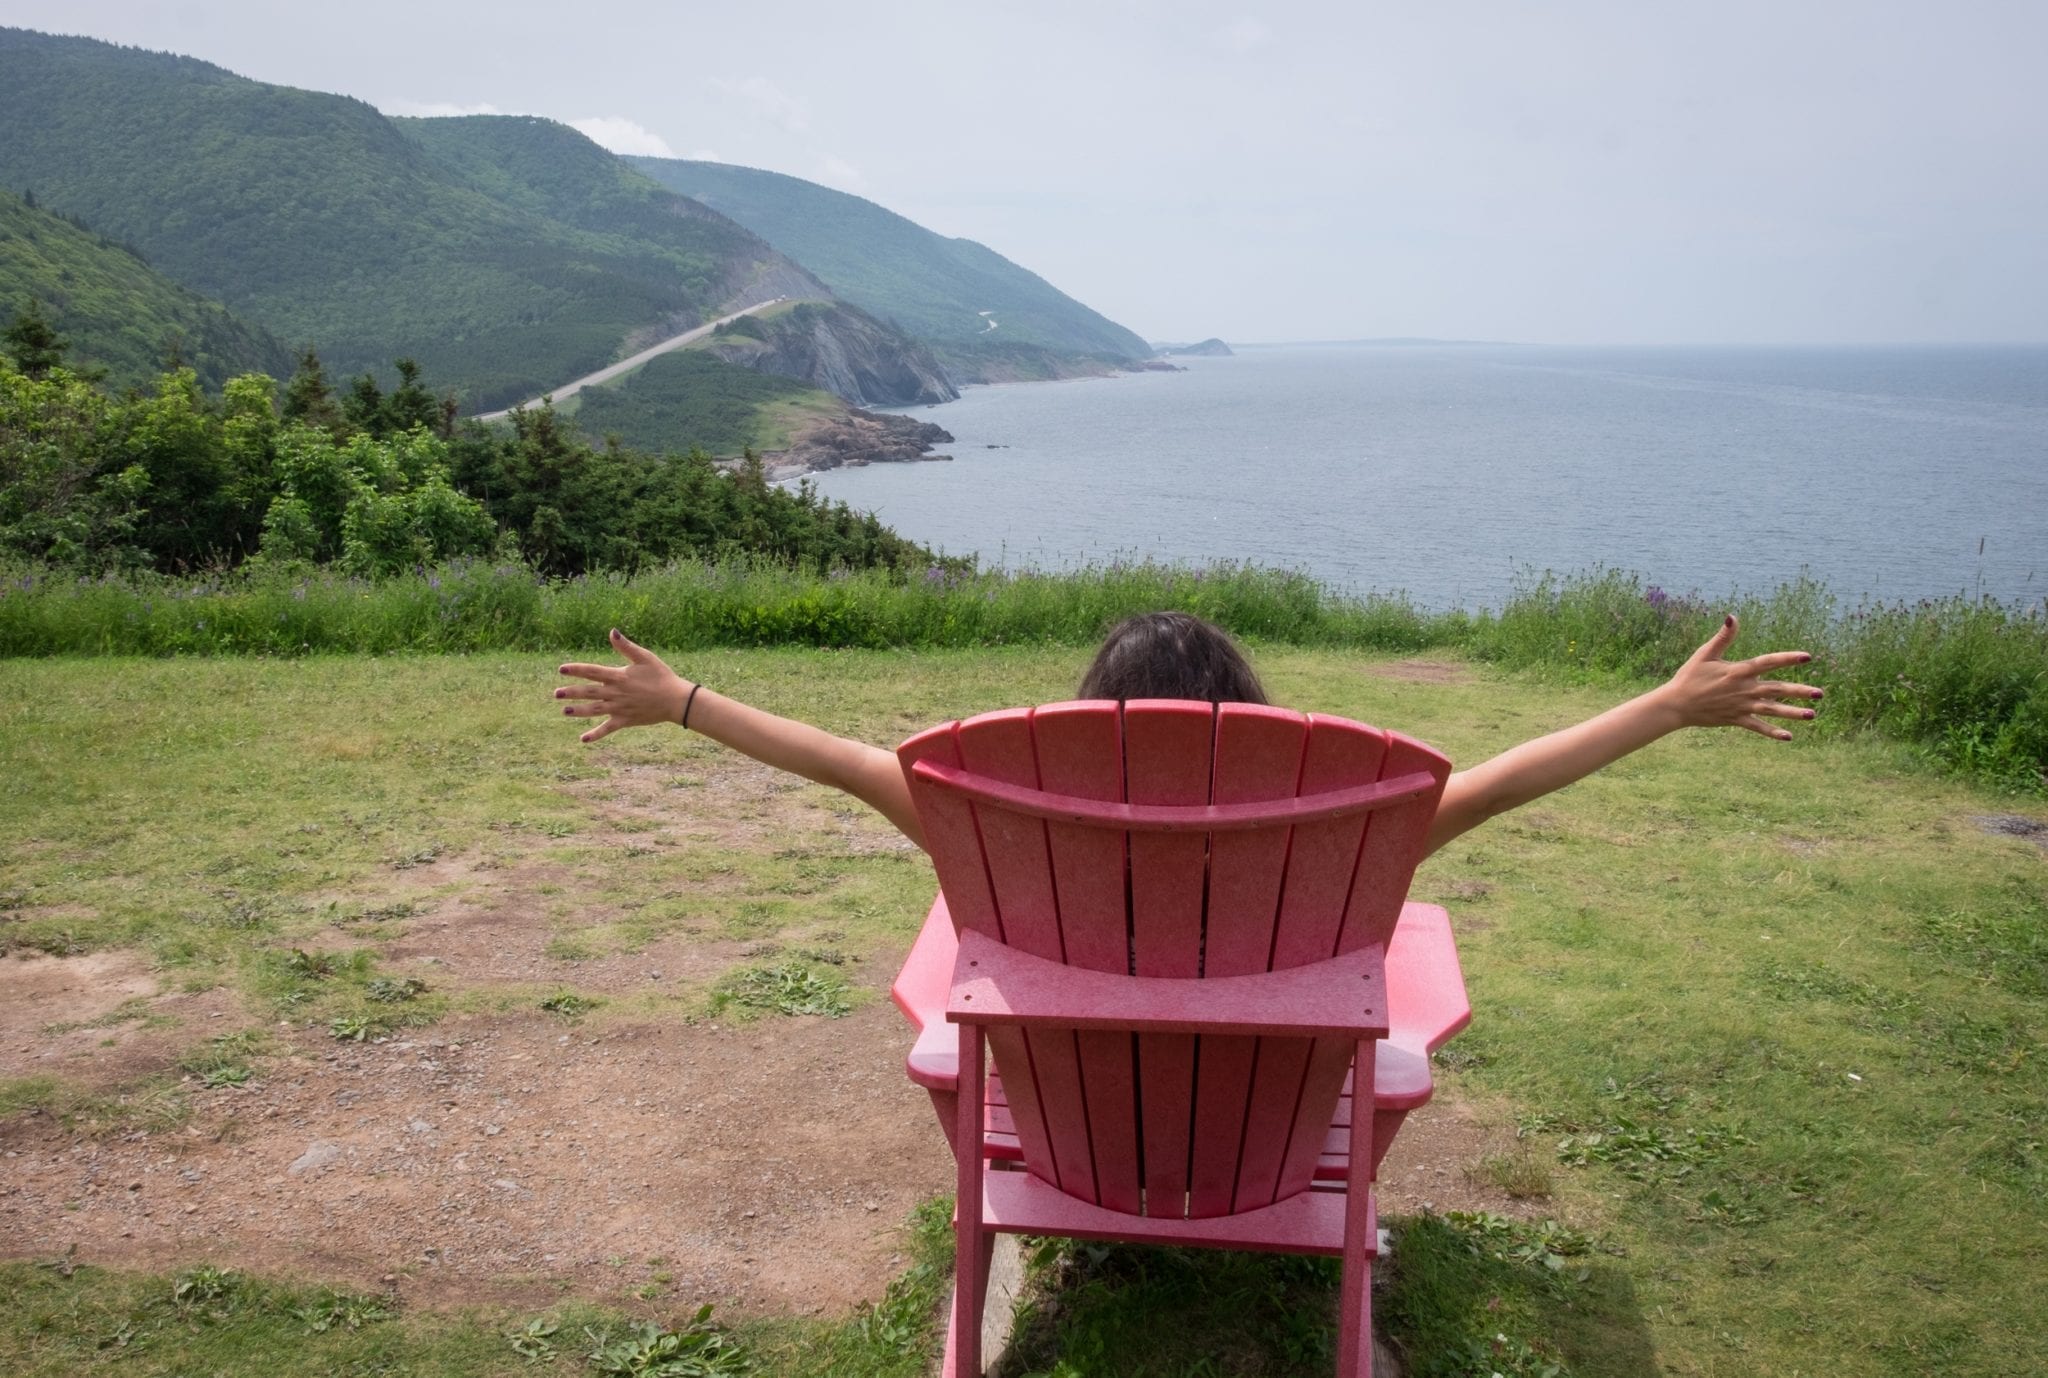 Kate sits in a red chair and has her arms up giving double thumbs ups. In front of her are hills, winding roads, and the ocean at Cape Breton Highlands National Park.